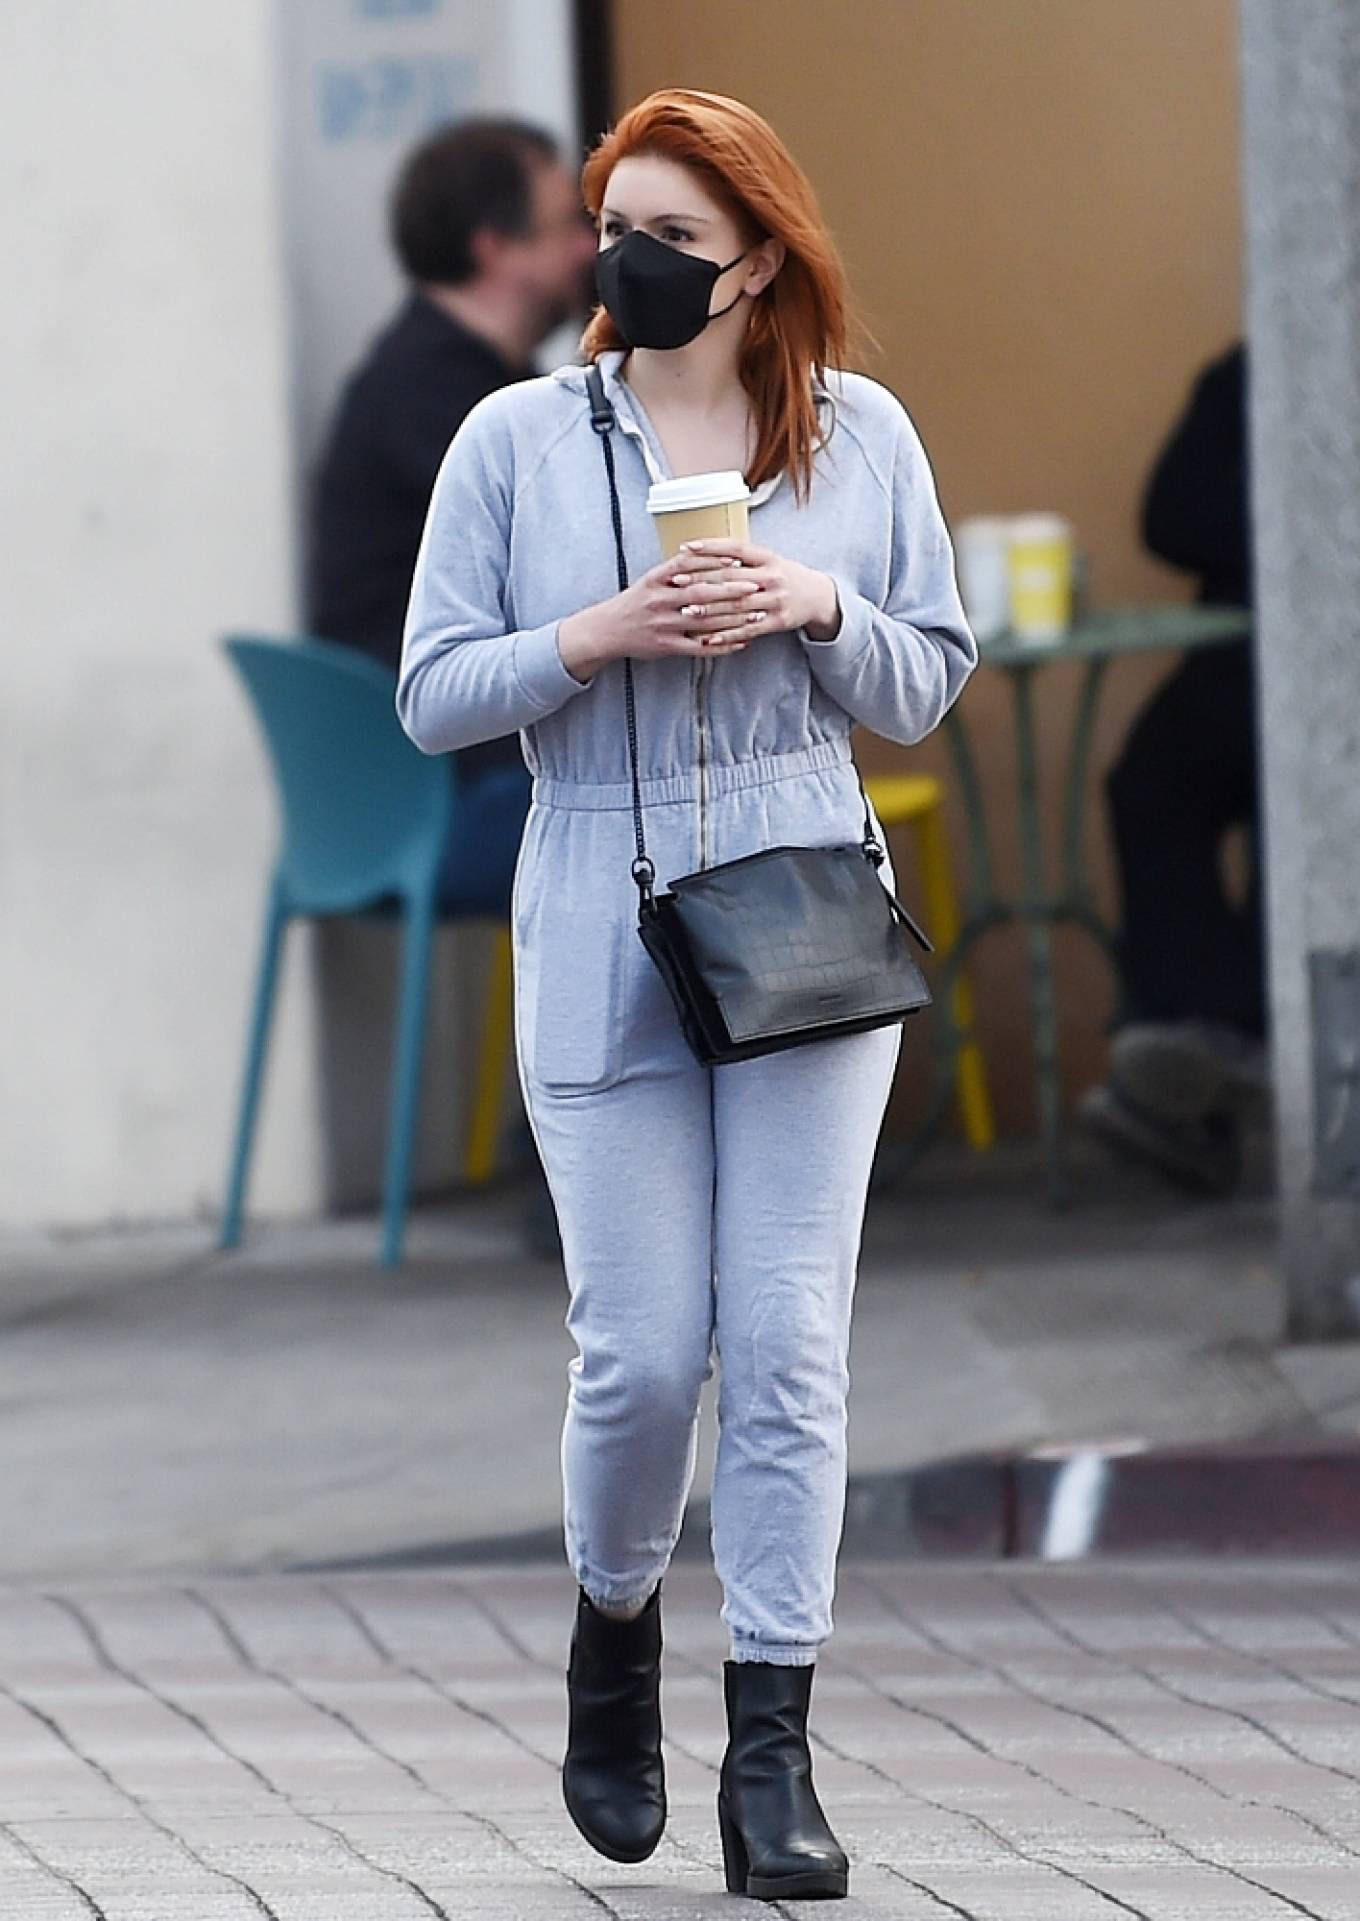 Ariel Winter 2021 : Ariel Winter – Grabs a cup of coffee in West Hollywood-18